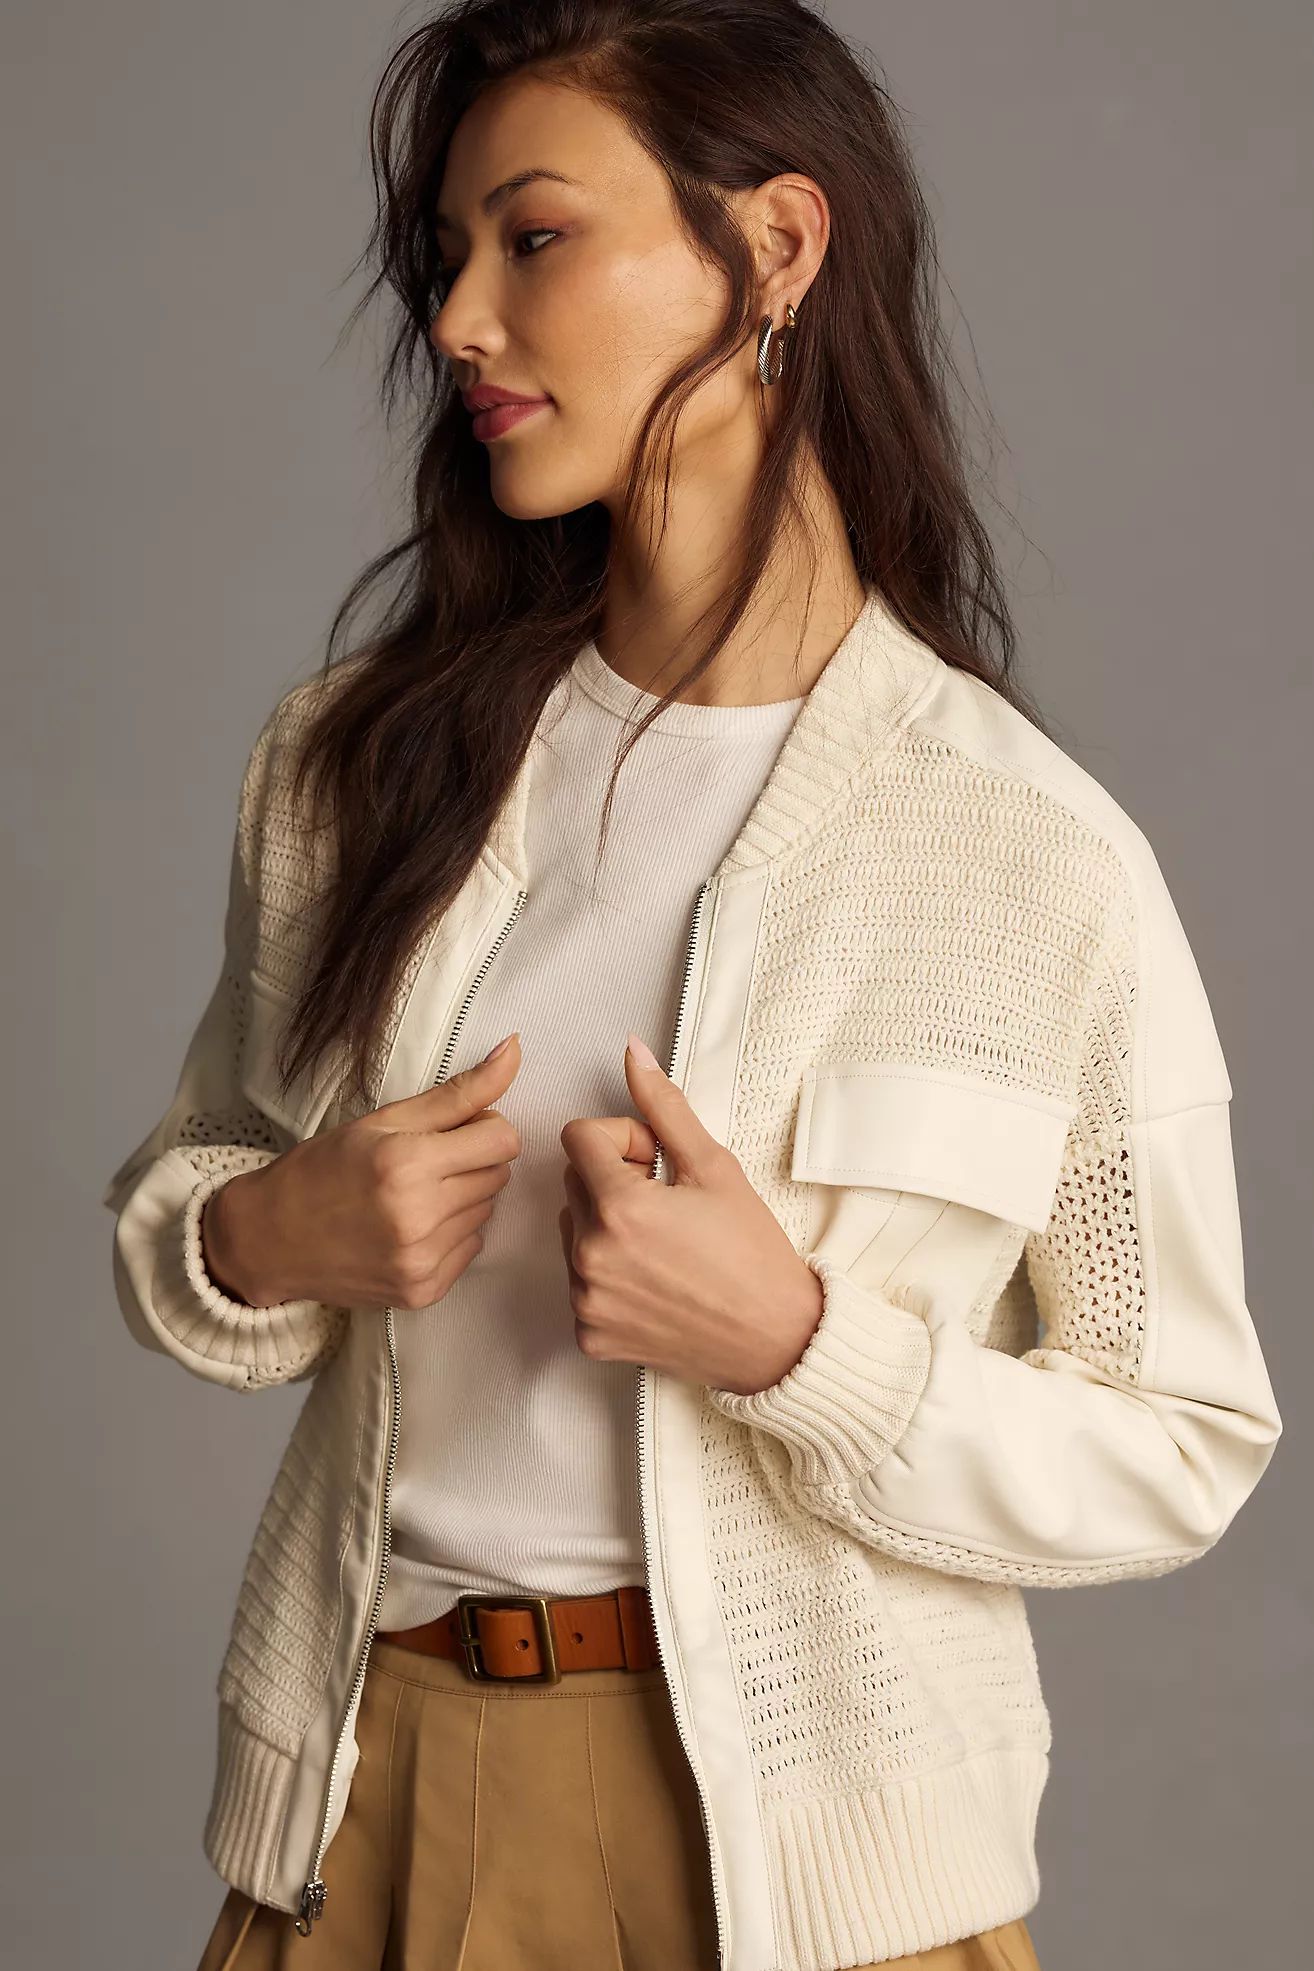 By Anthropologie Crochet Bomber Cardigan Sweater | Anthropologie (US)